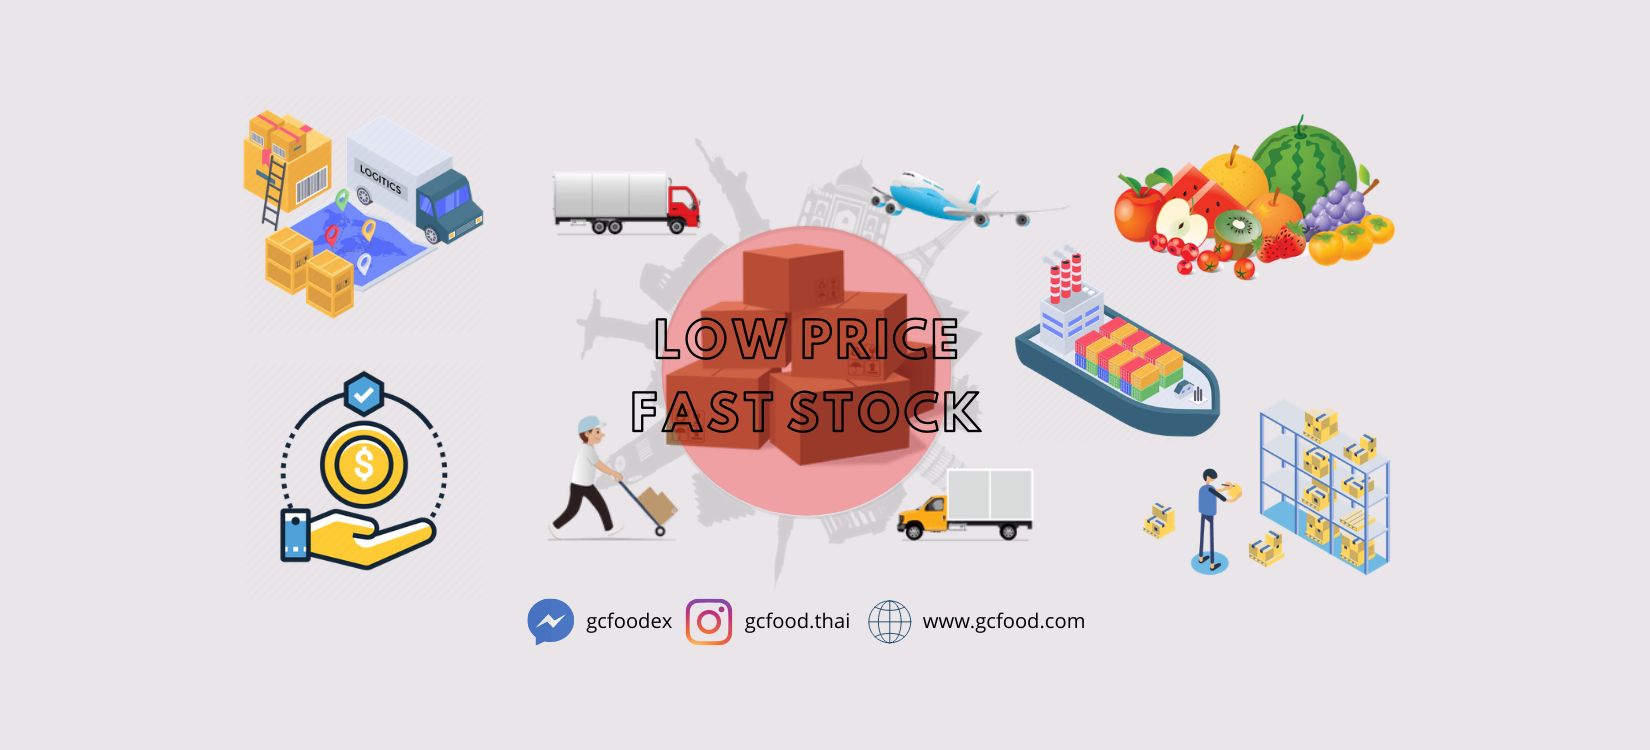 LOW PRICE FAST STOCK PROMPT SHIPMENT